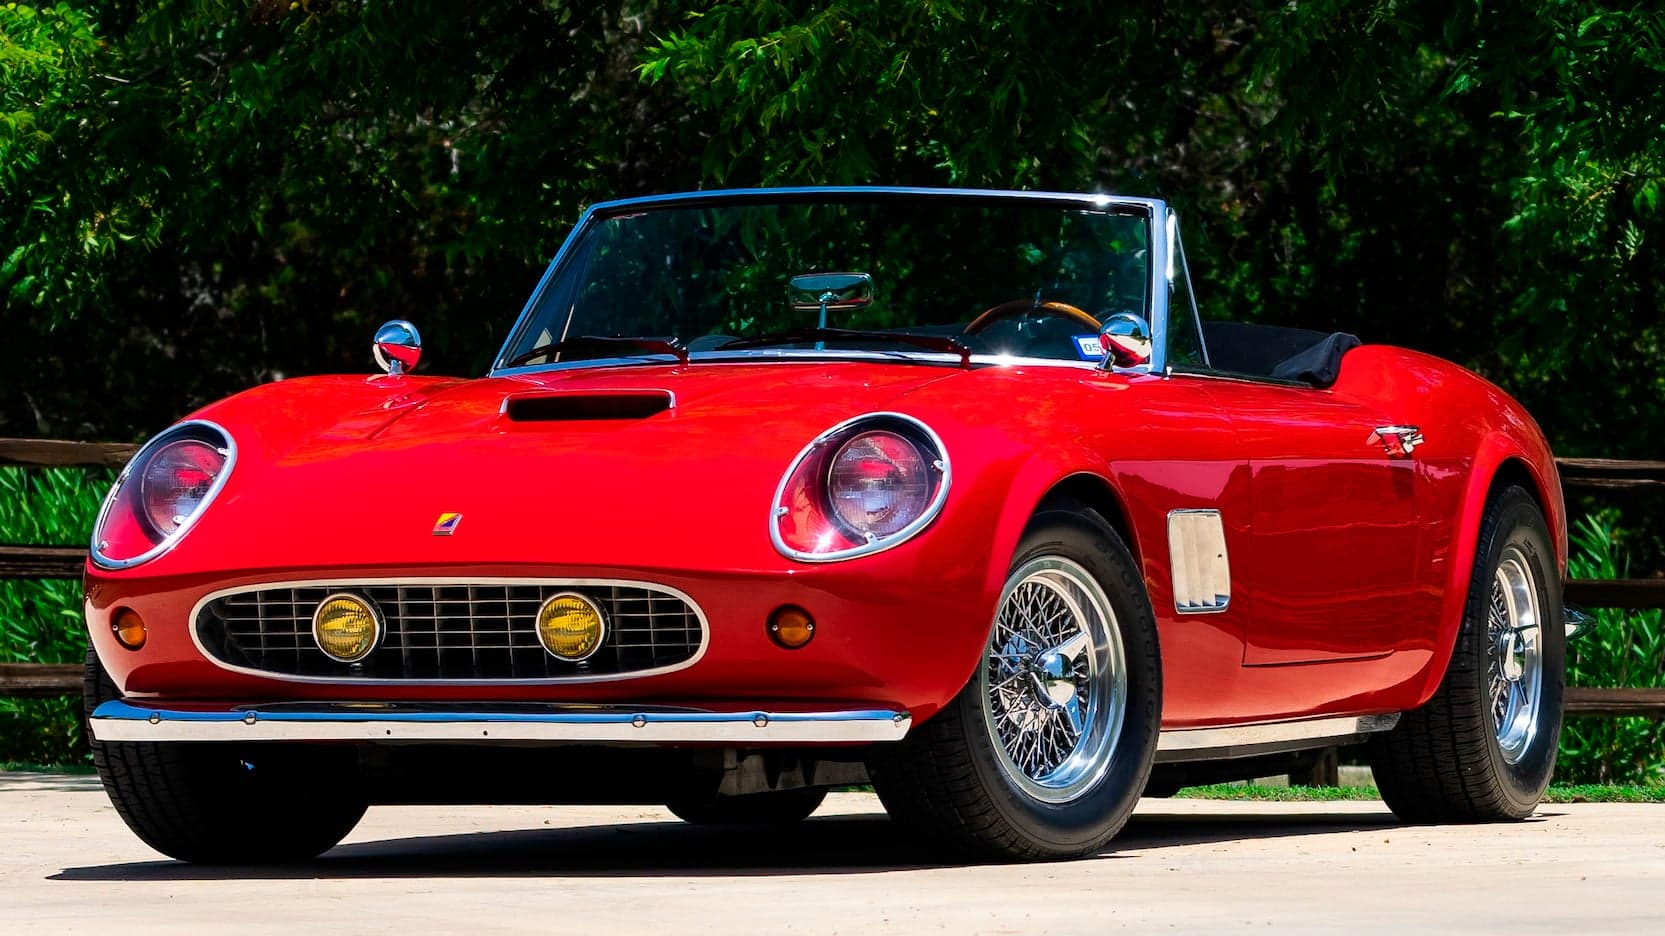 The Ferrari from Ferris Bueller’s Day Off Is Going to Auction